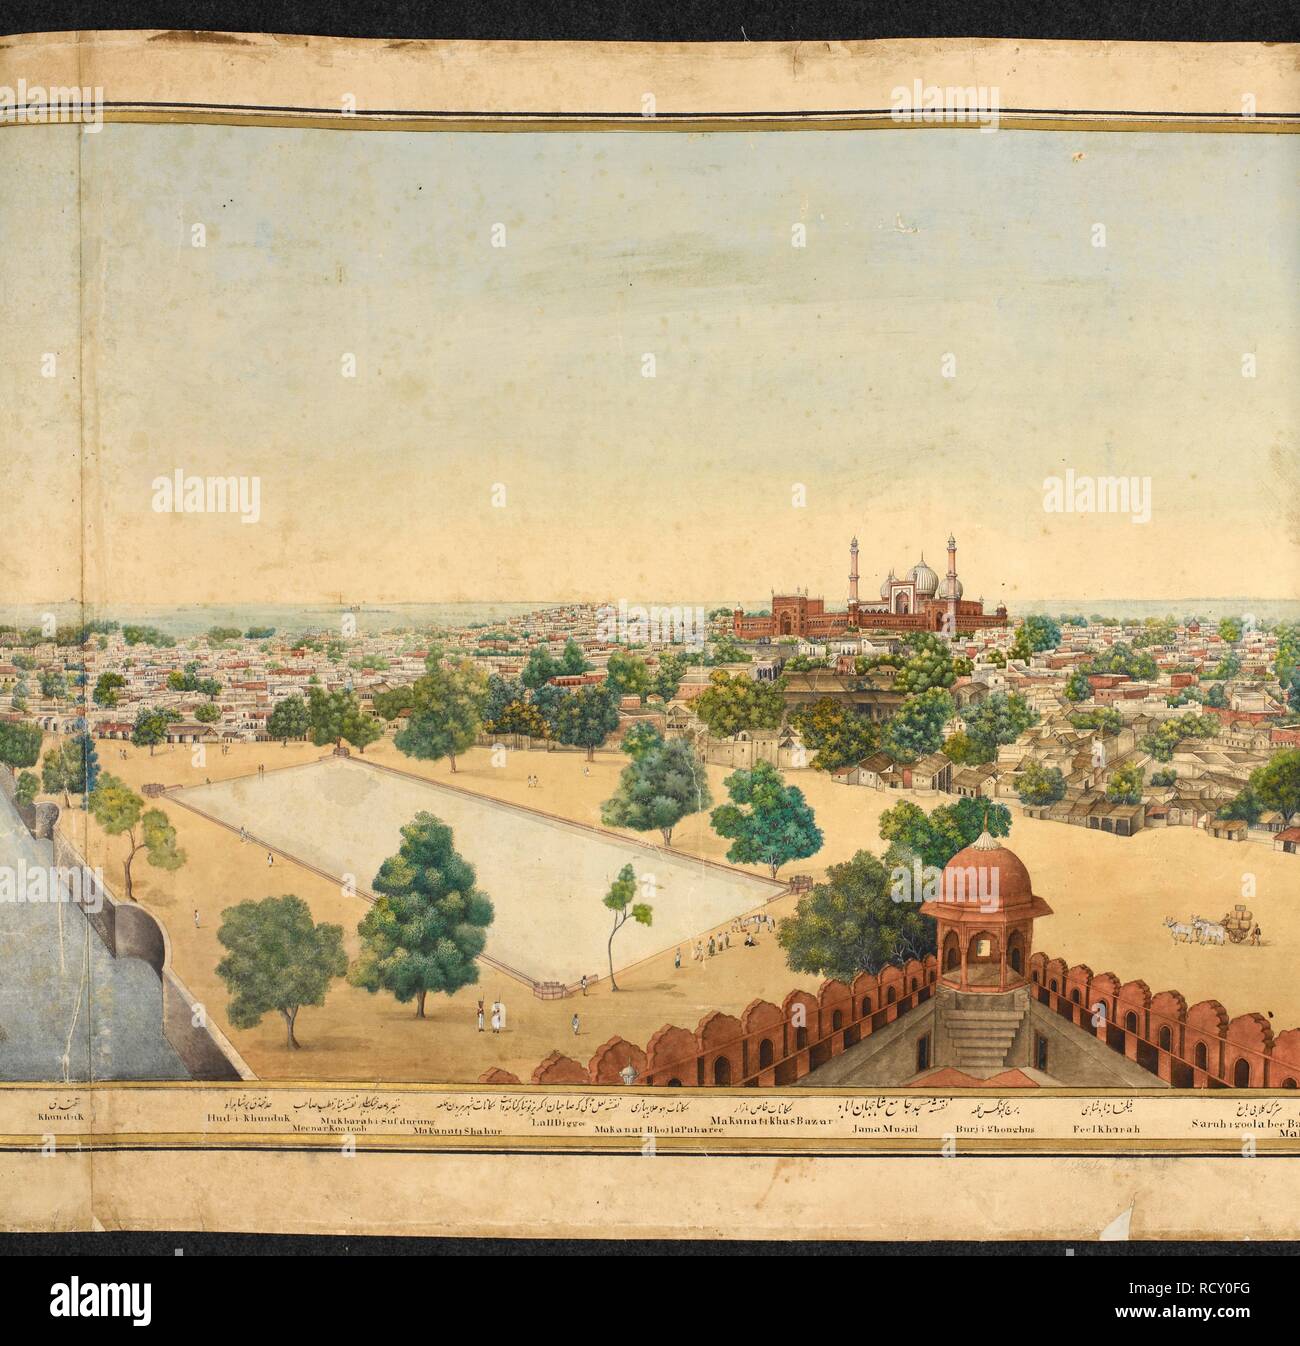 Section of a panorama of Delhi, showing the Jama Masjid. Panorama of Delhi. 25th November 1846. From a panorama of Delhi taken through almost 360 degrees from the top of the Lahore gate of the Red Fort, Delhi. Inscribed in Persian, Urdu and English. Water-colour and body-colour with gold; 665 by 4908 mm (530 by 4828 mm within frame) on five sheets of paper, glued together to form a scroll. Source: Add.Or.4126. Language: Persian, English and Urdu. Author: Khan, Mazhar 'Ali. Stock Photo